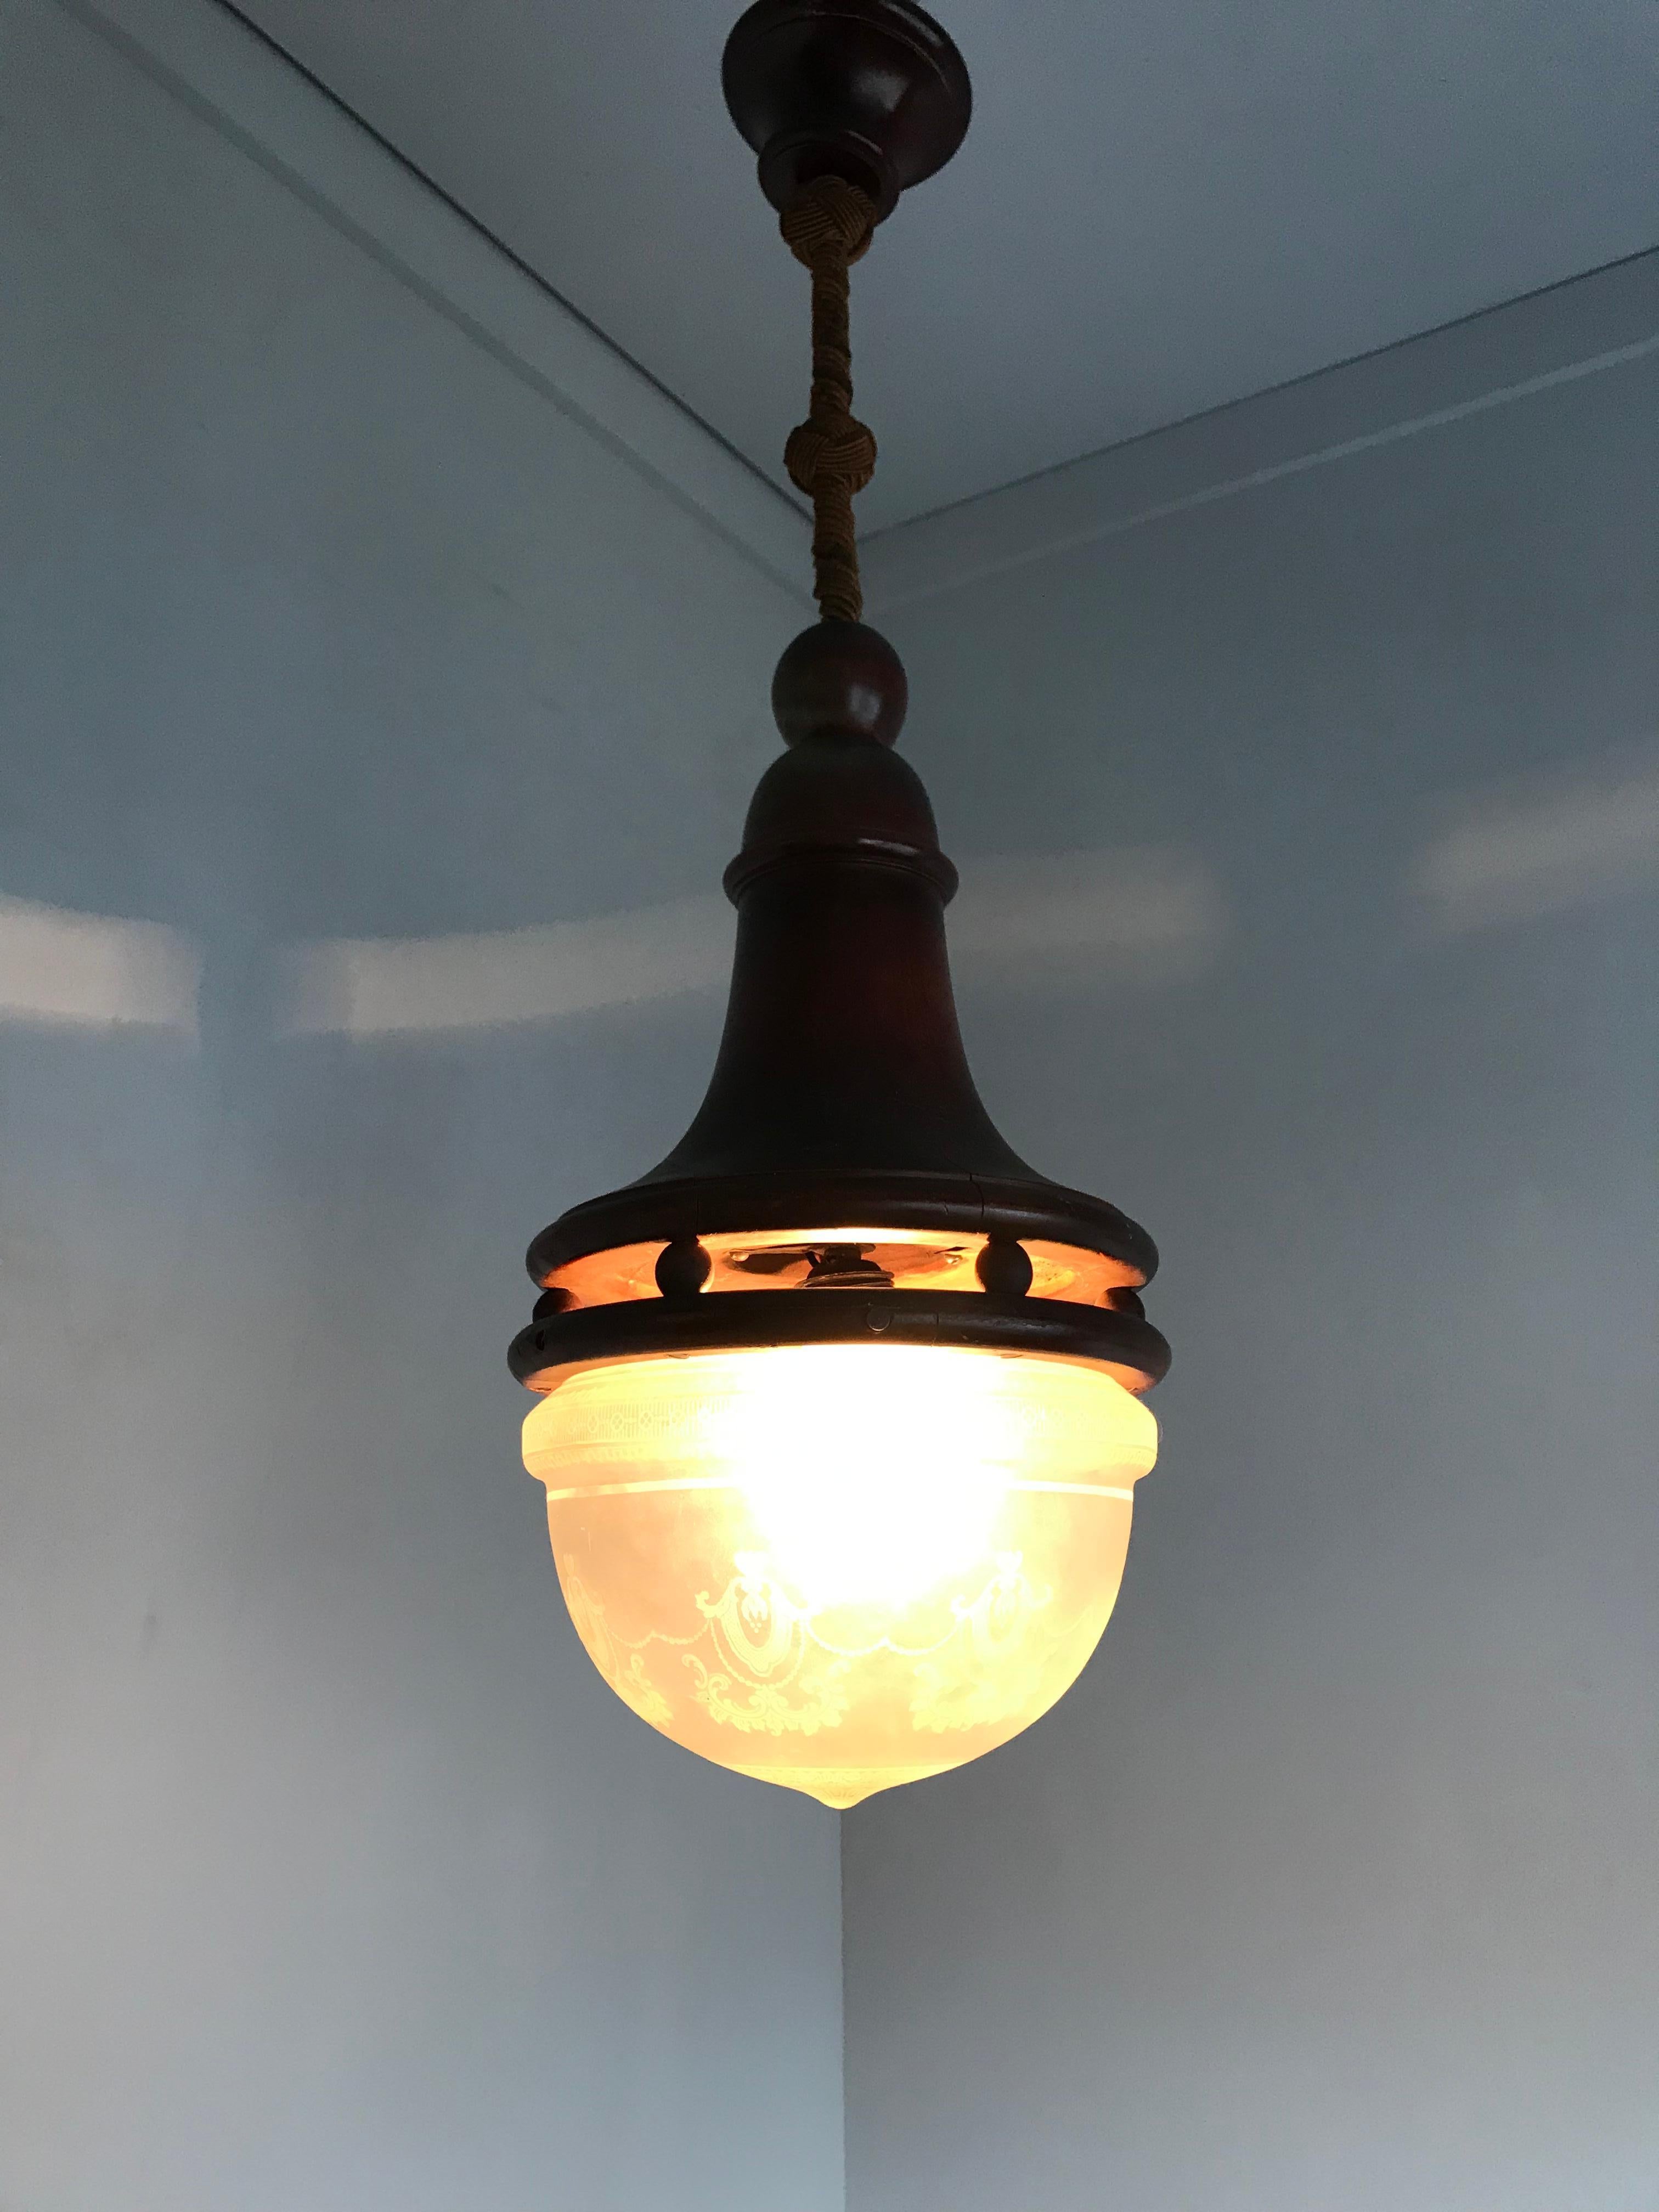 Wonderful and all handcrafted Viennese pendant.

If you live in an early 1900s Arts & Crafts home or if you are a collector of unique and stylish home accessories of that period then this handcrafted light fixture could be perfect for you. We have